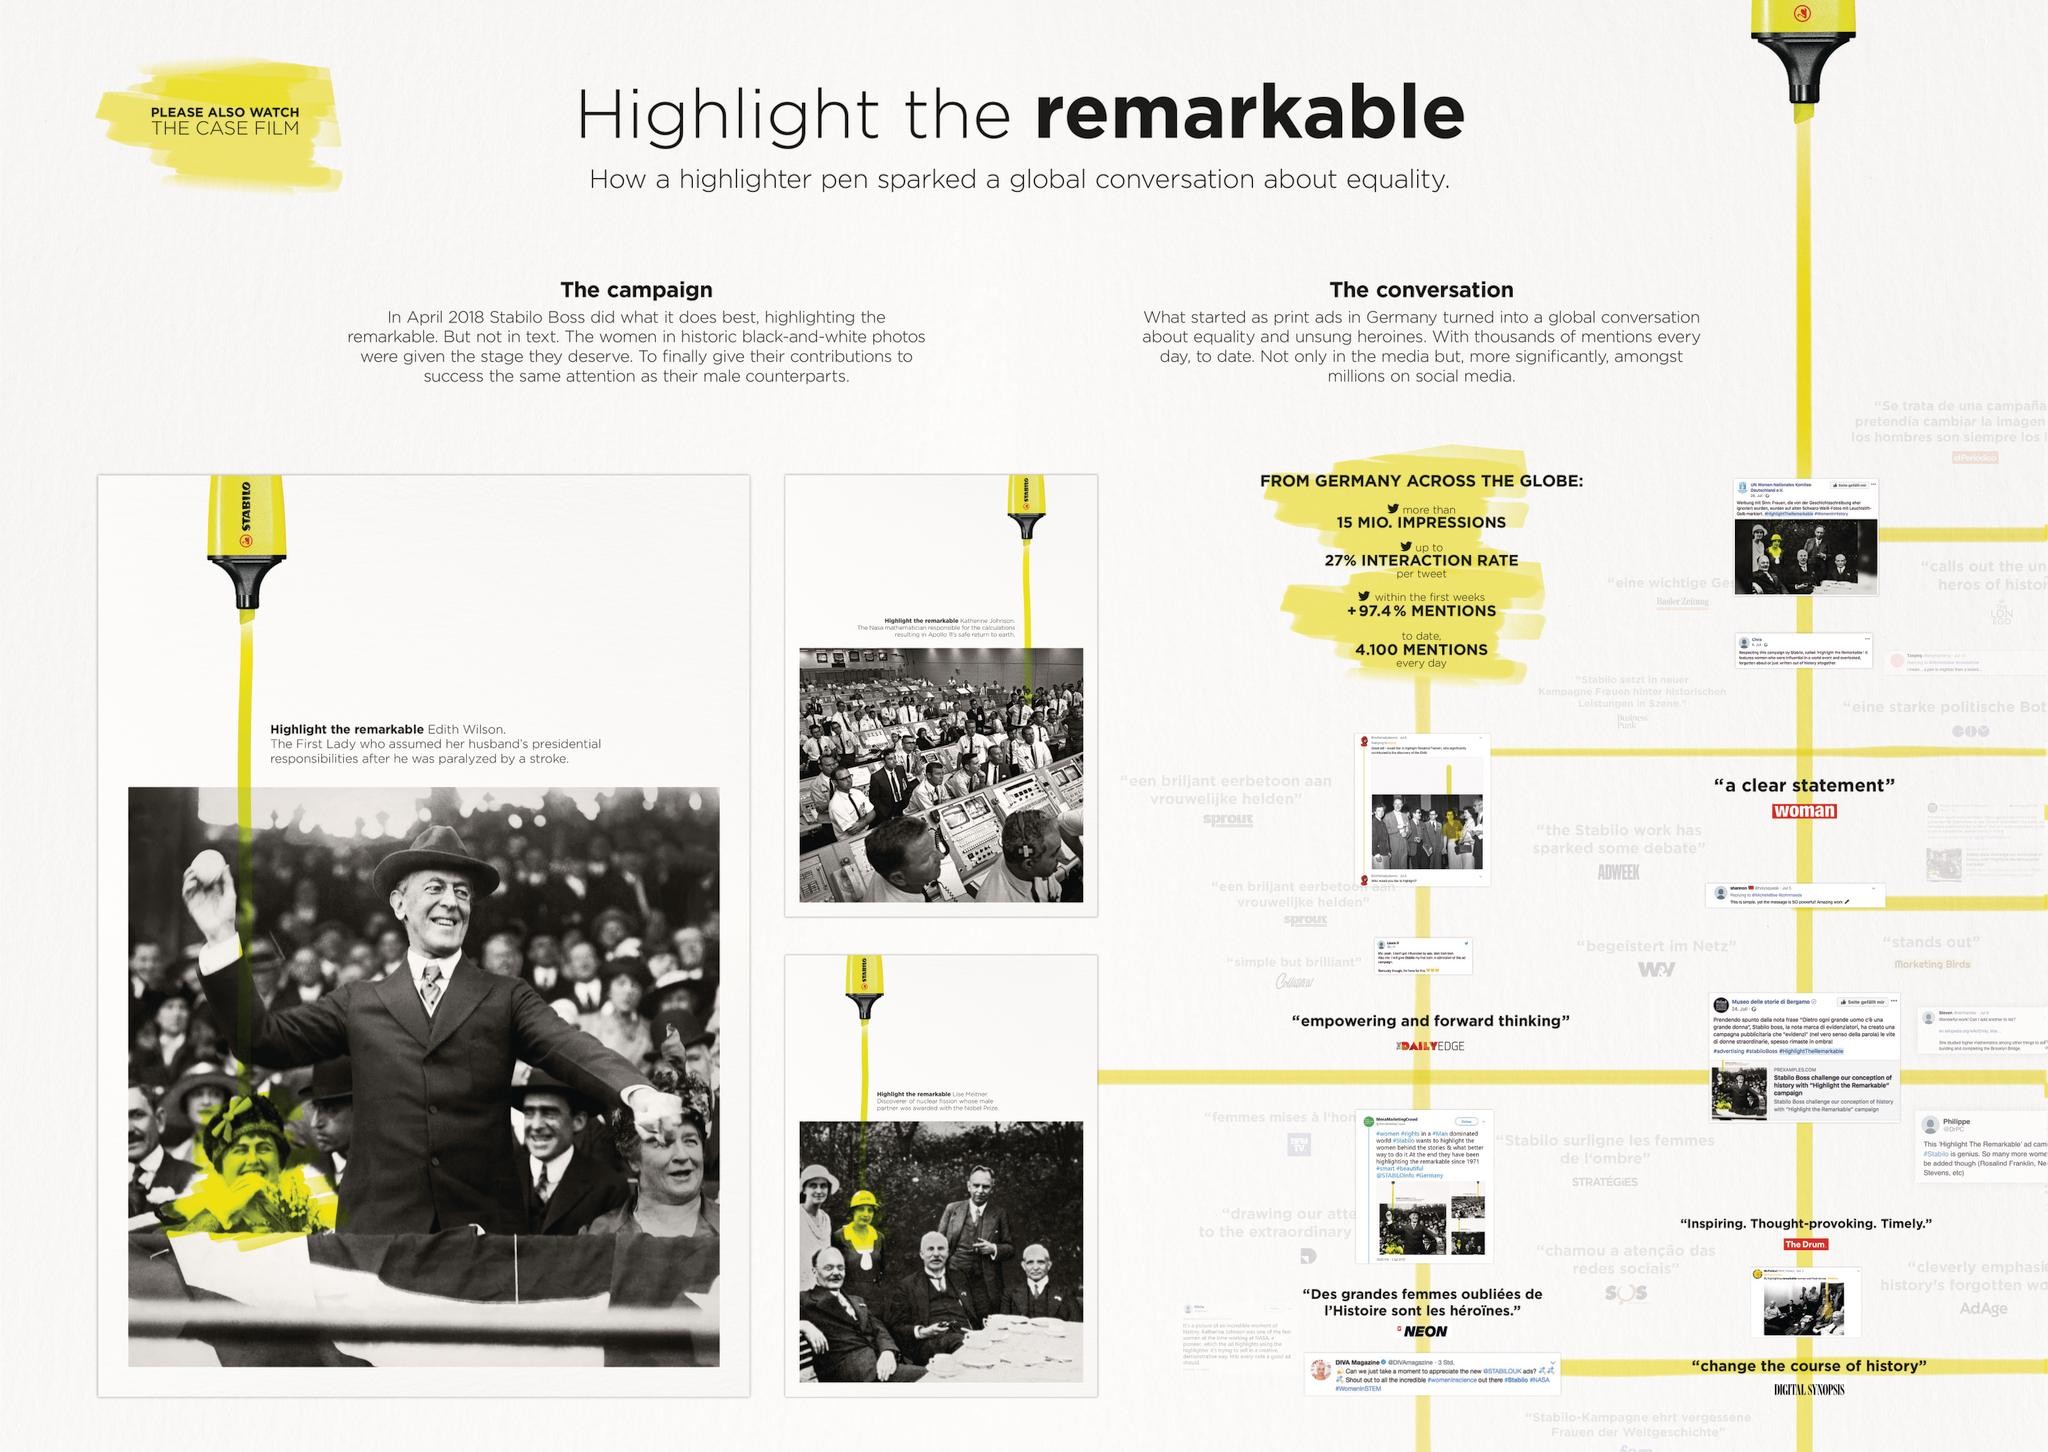 HIGHLIGHT THE REMARKABLE